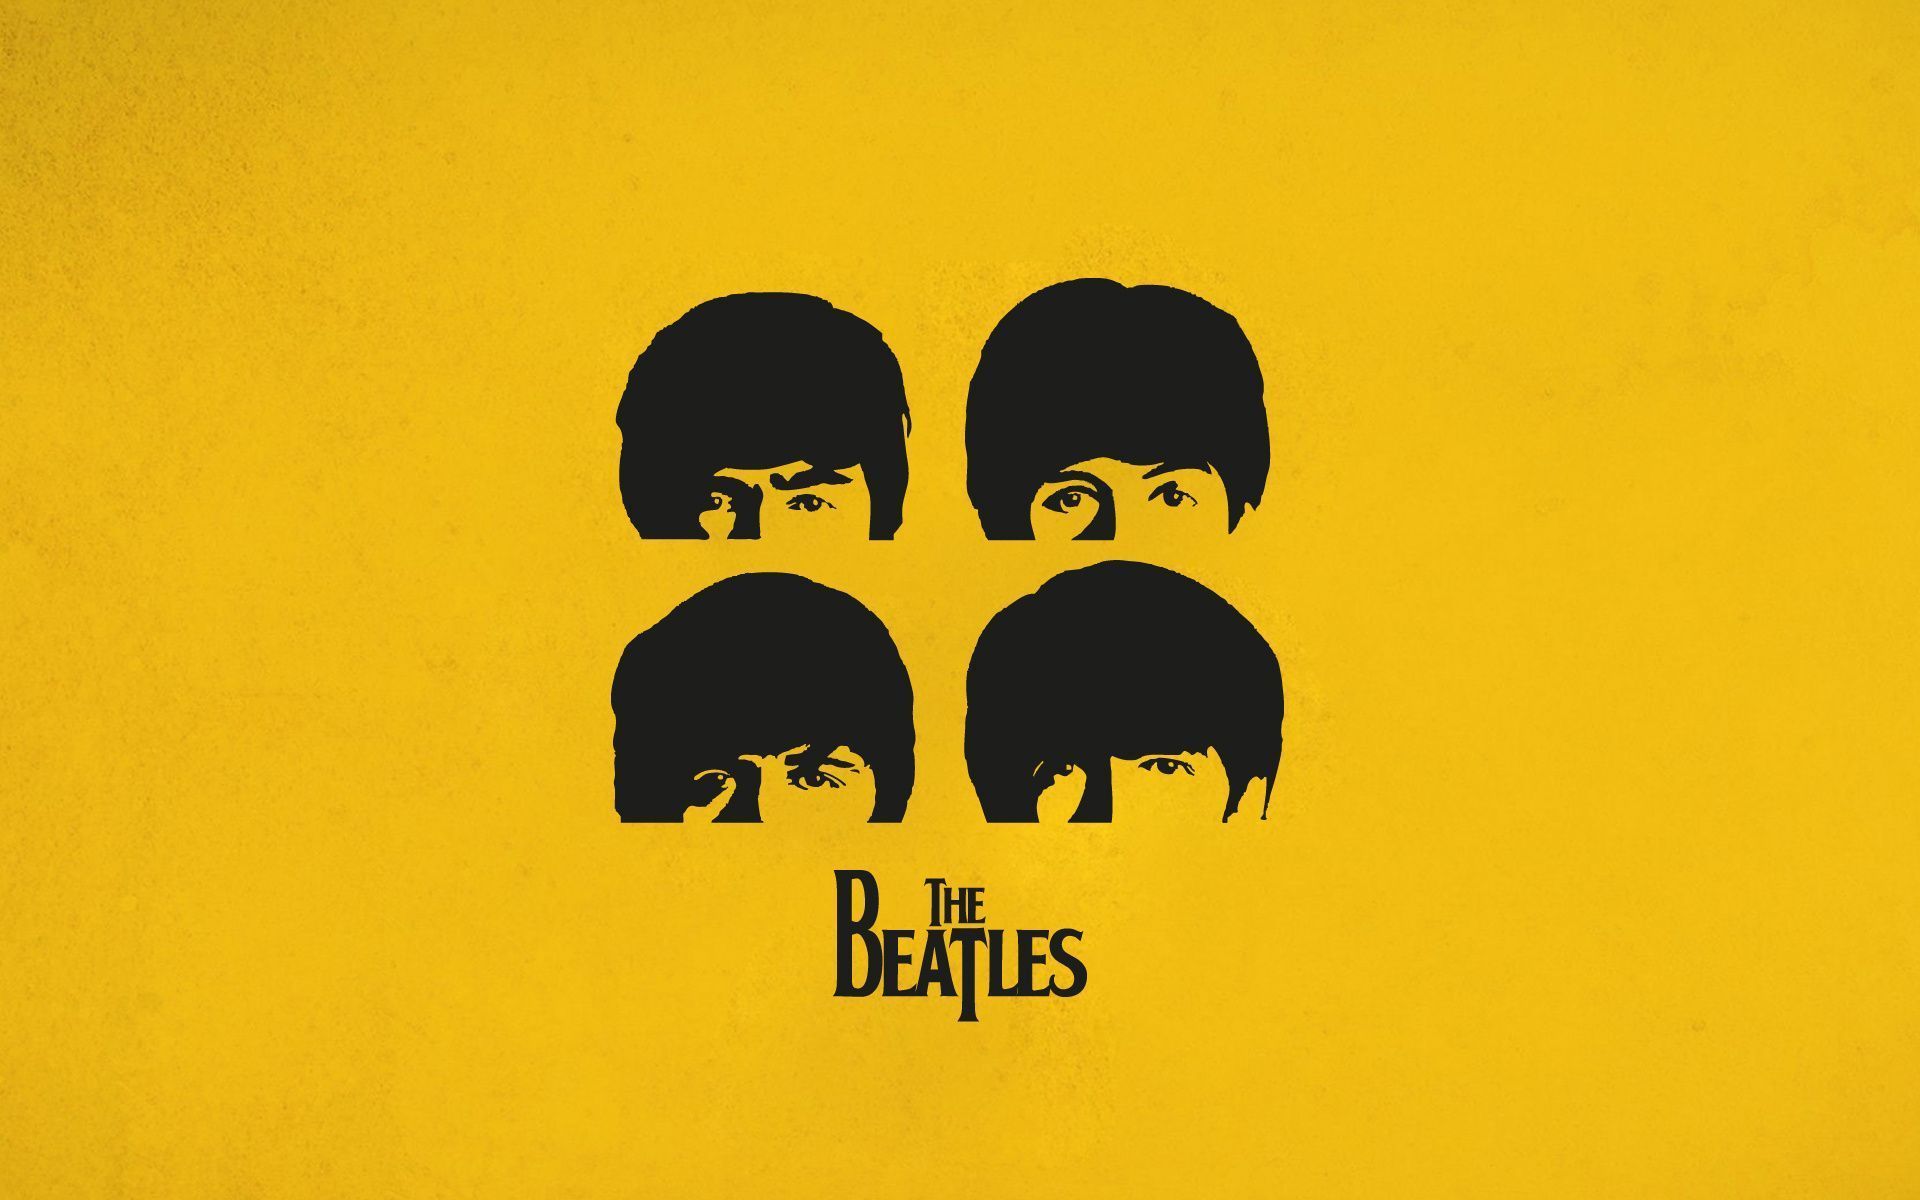 The beatles are on a yellow background - Yellow, 1920x1200